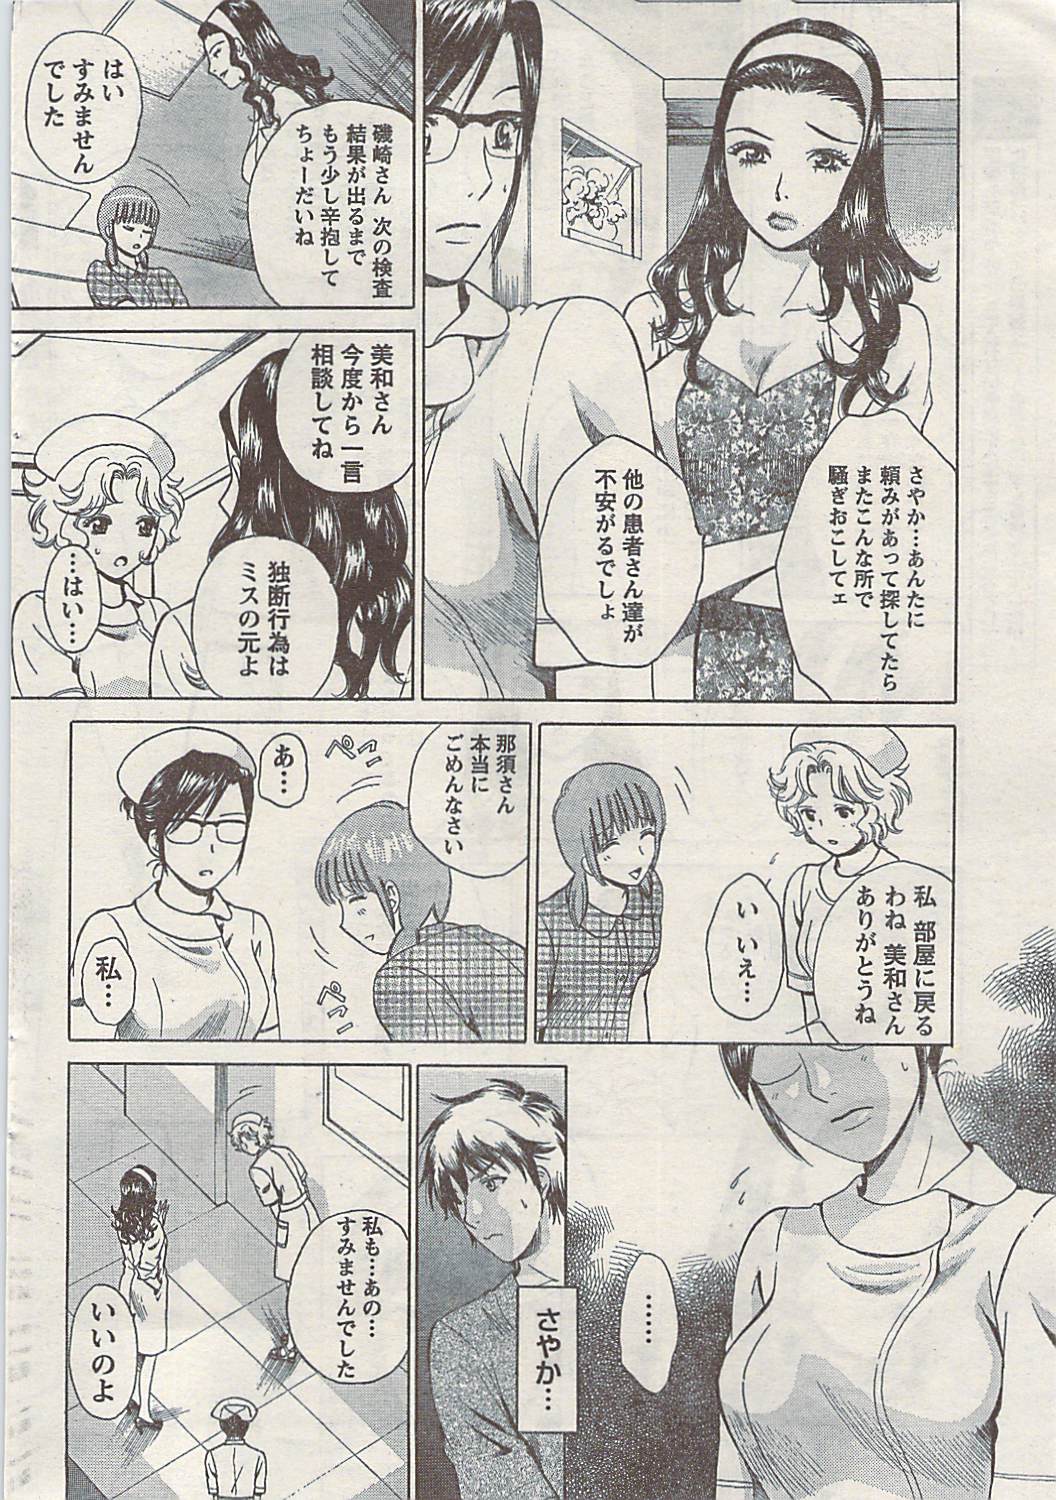 Doki! Special  2009-06 page 40 full